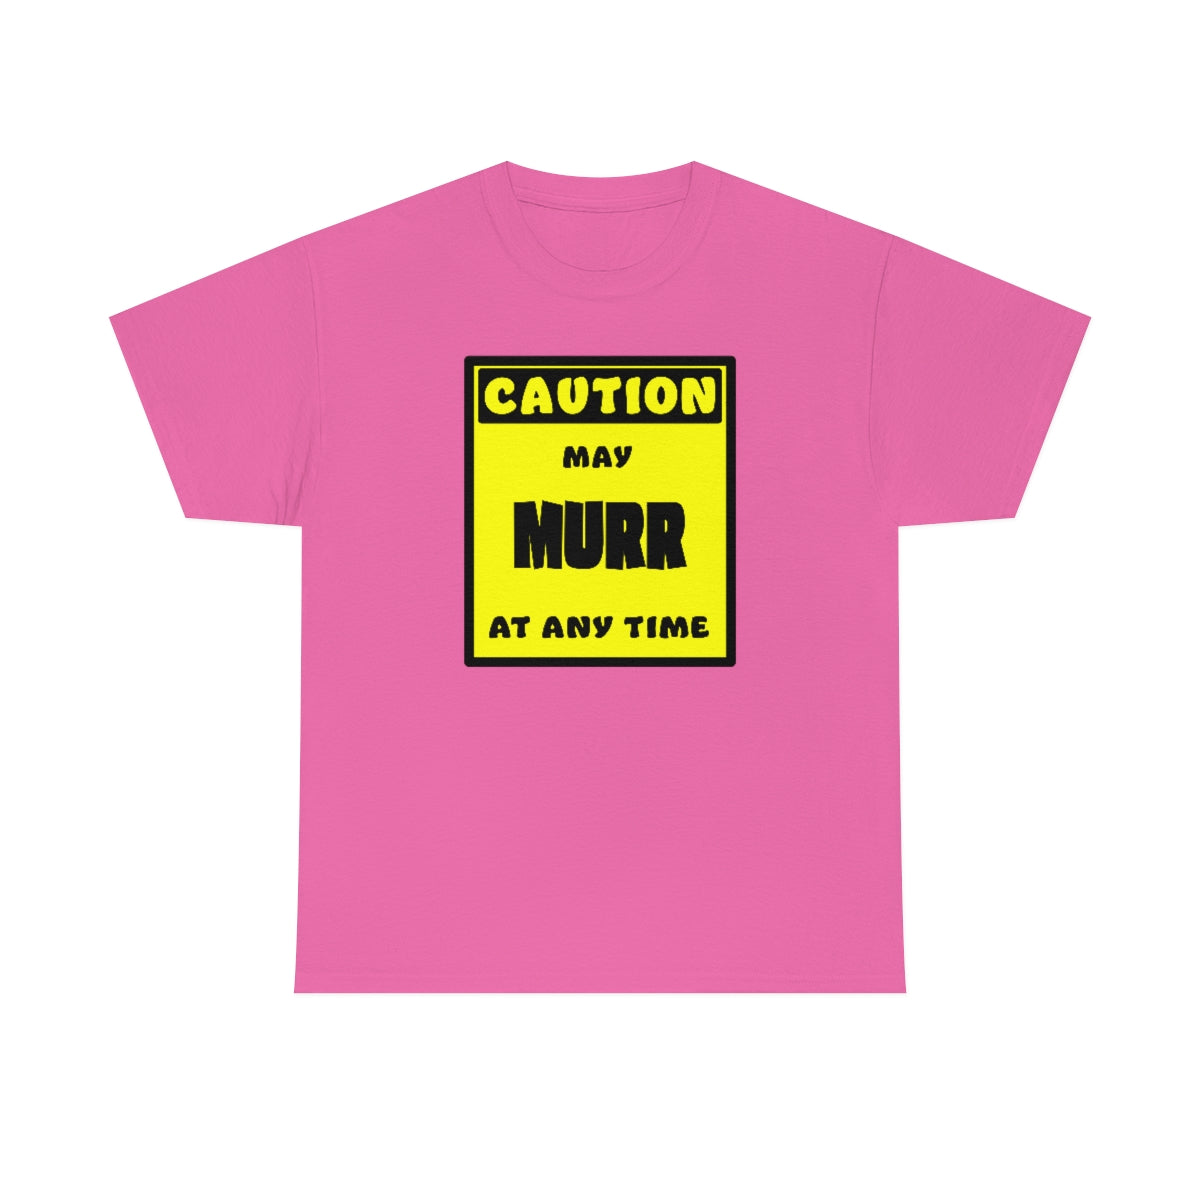 CAUTION! May MURR at any time! - T-Shirt T-Shirt AFLT-Whootorca Pink S 